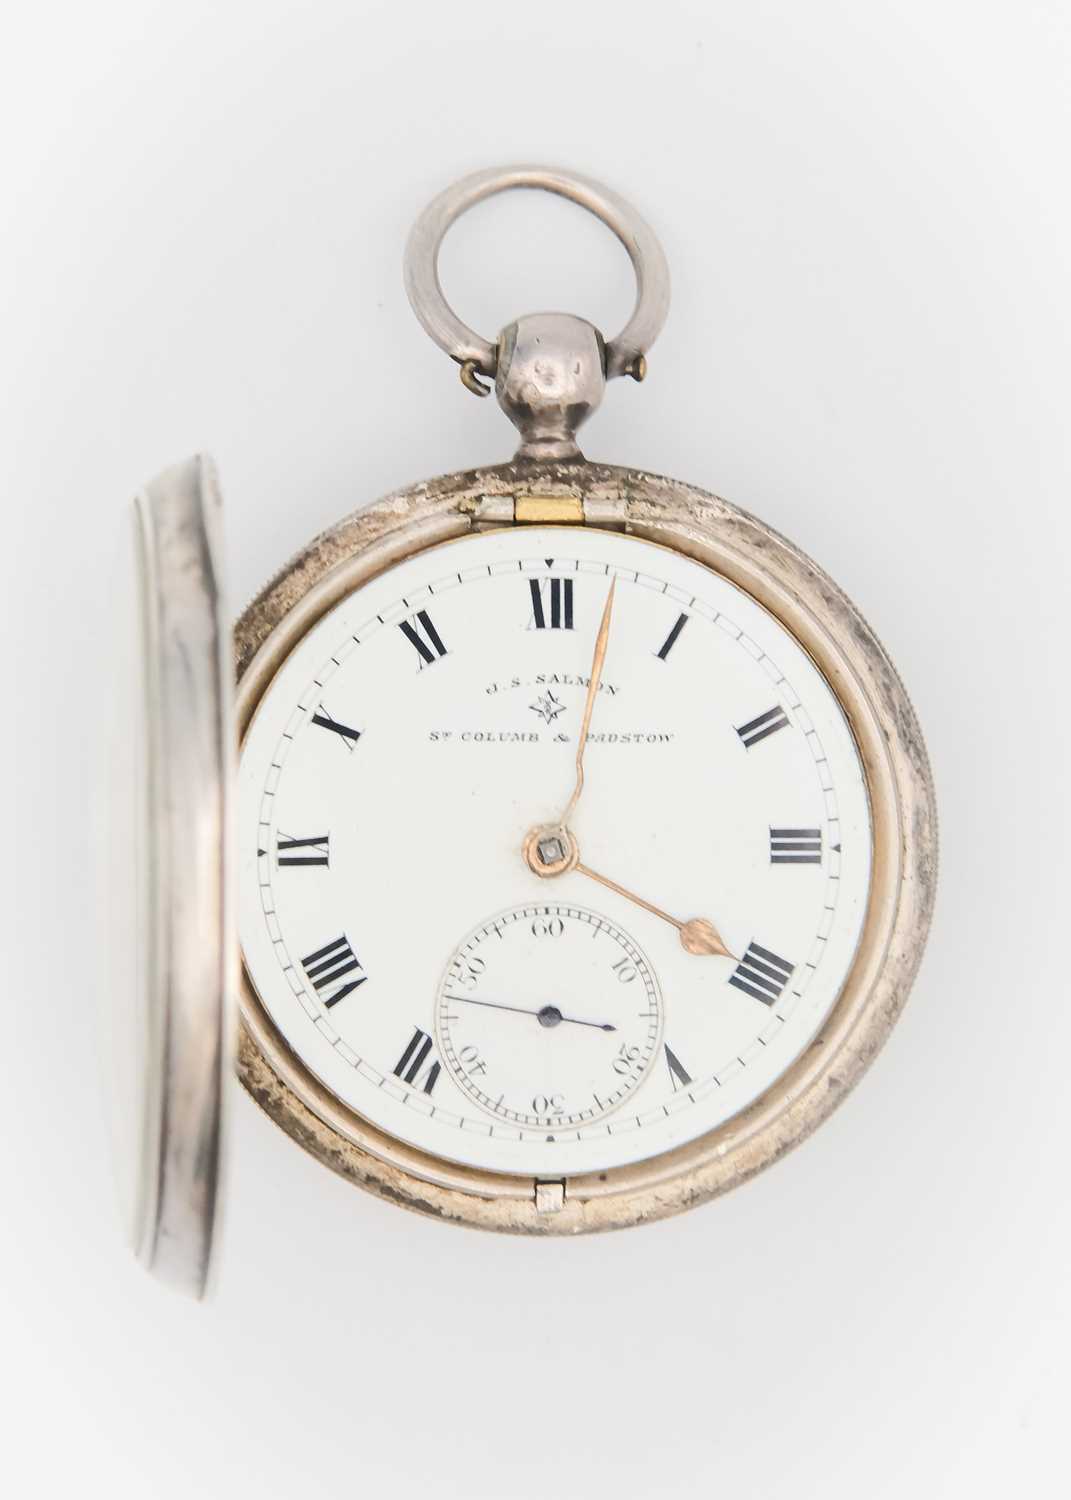 A silver-cased key wind pocket lever watch. - Image 2 of 6